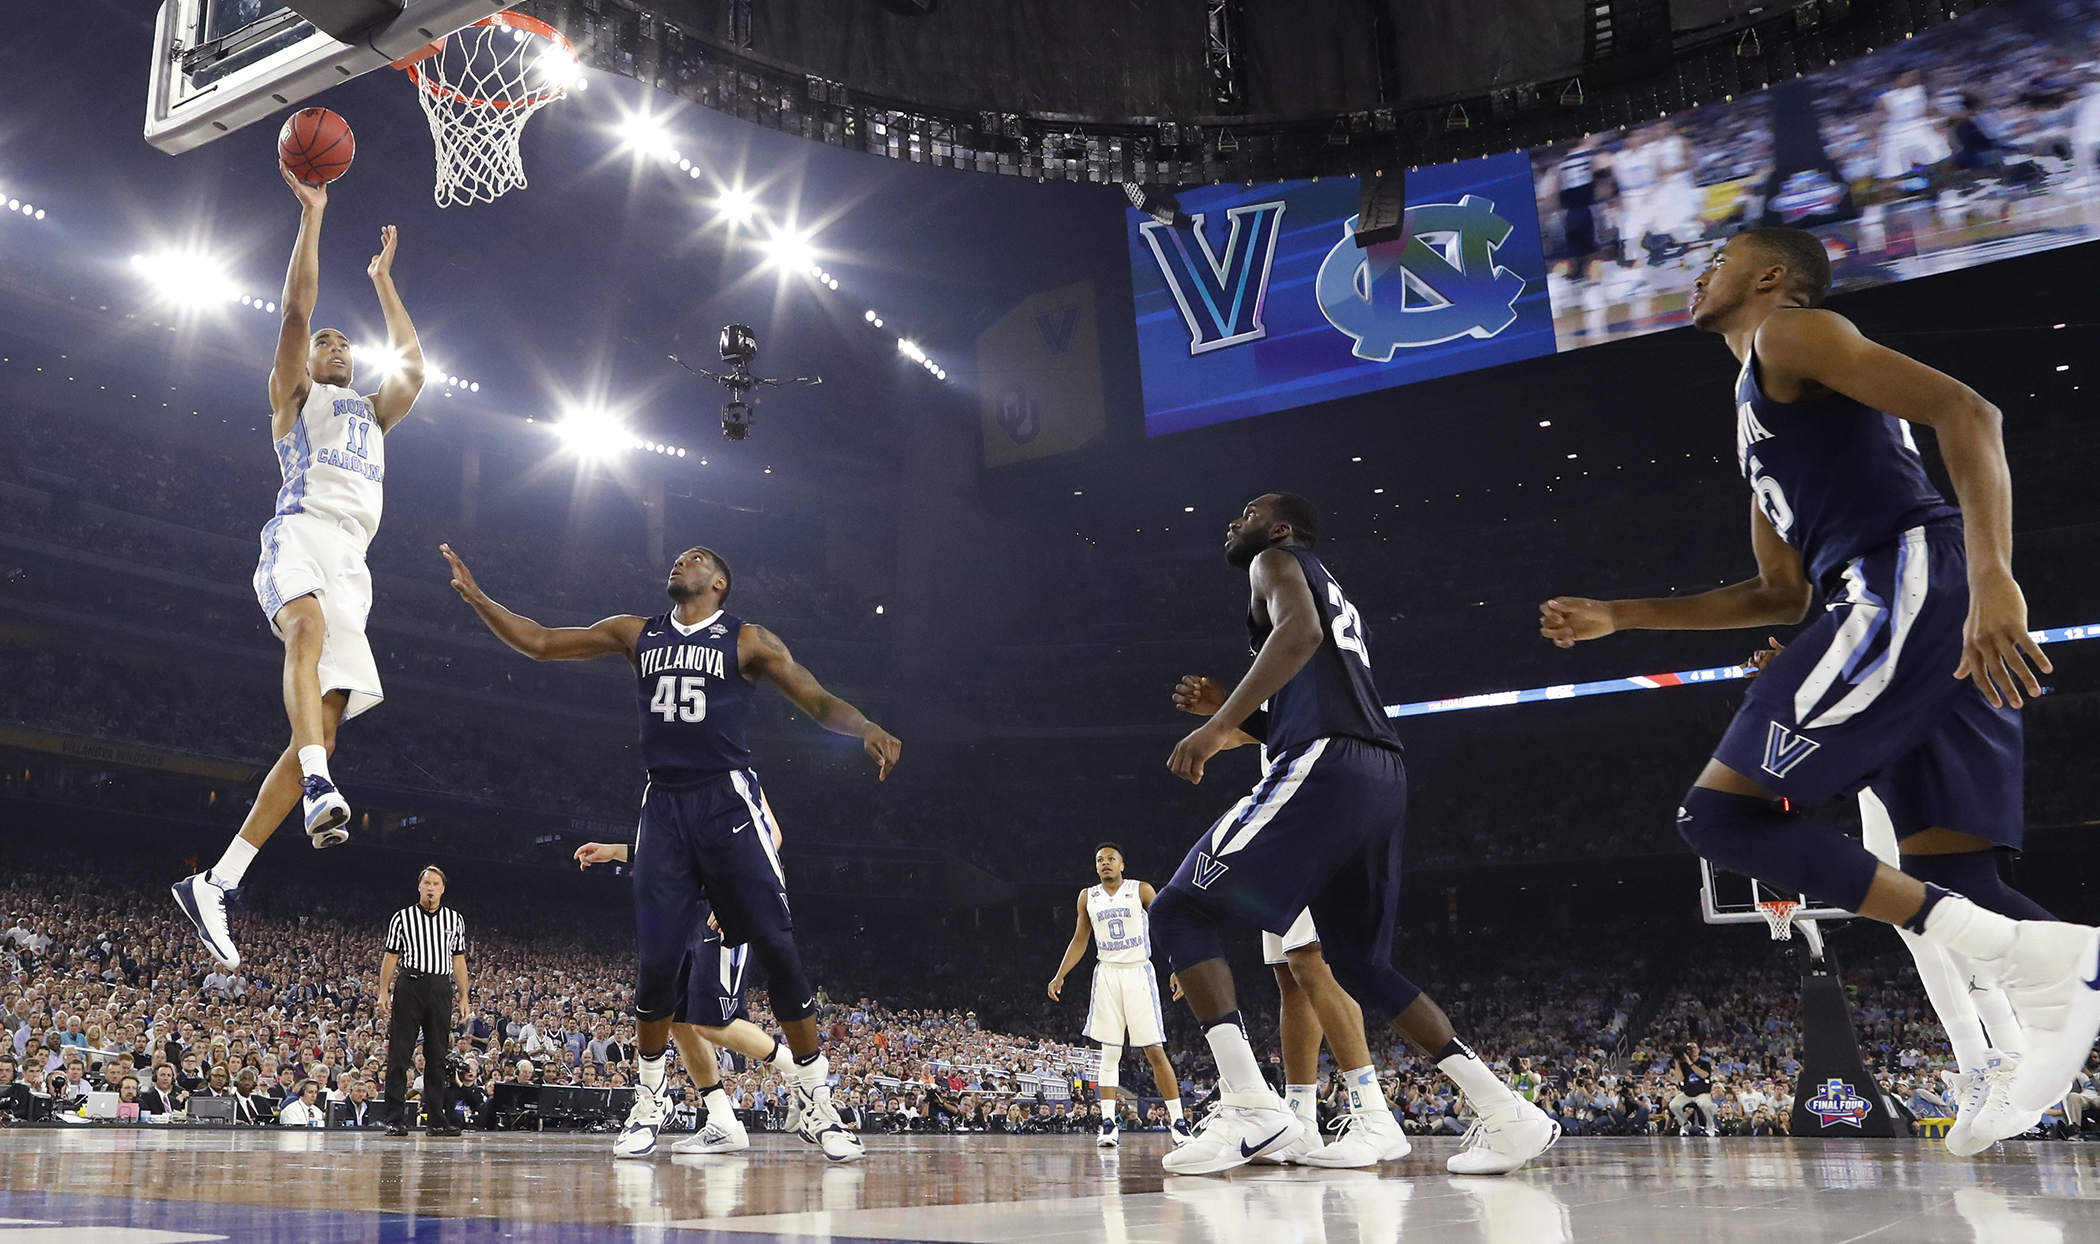 Buzzer beaters are part of the Final Four fabric